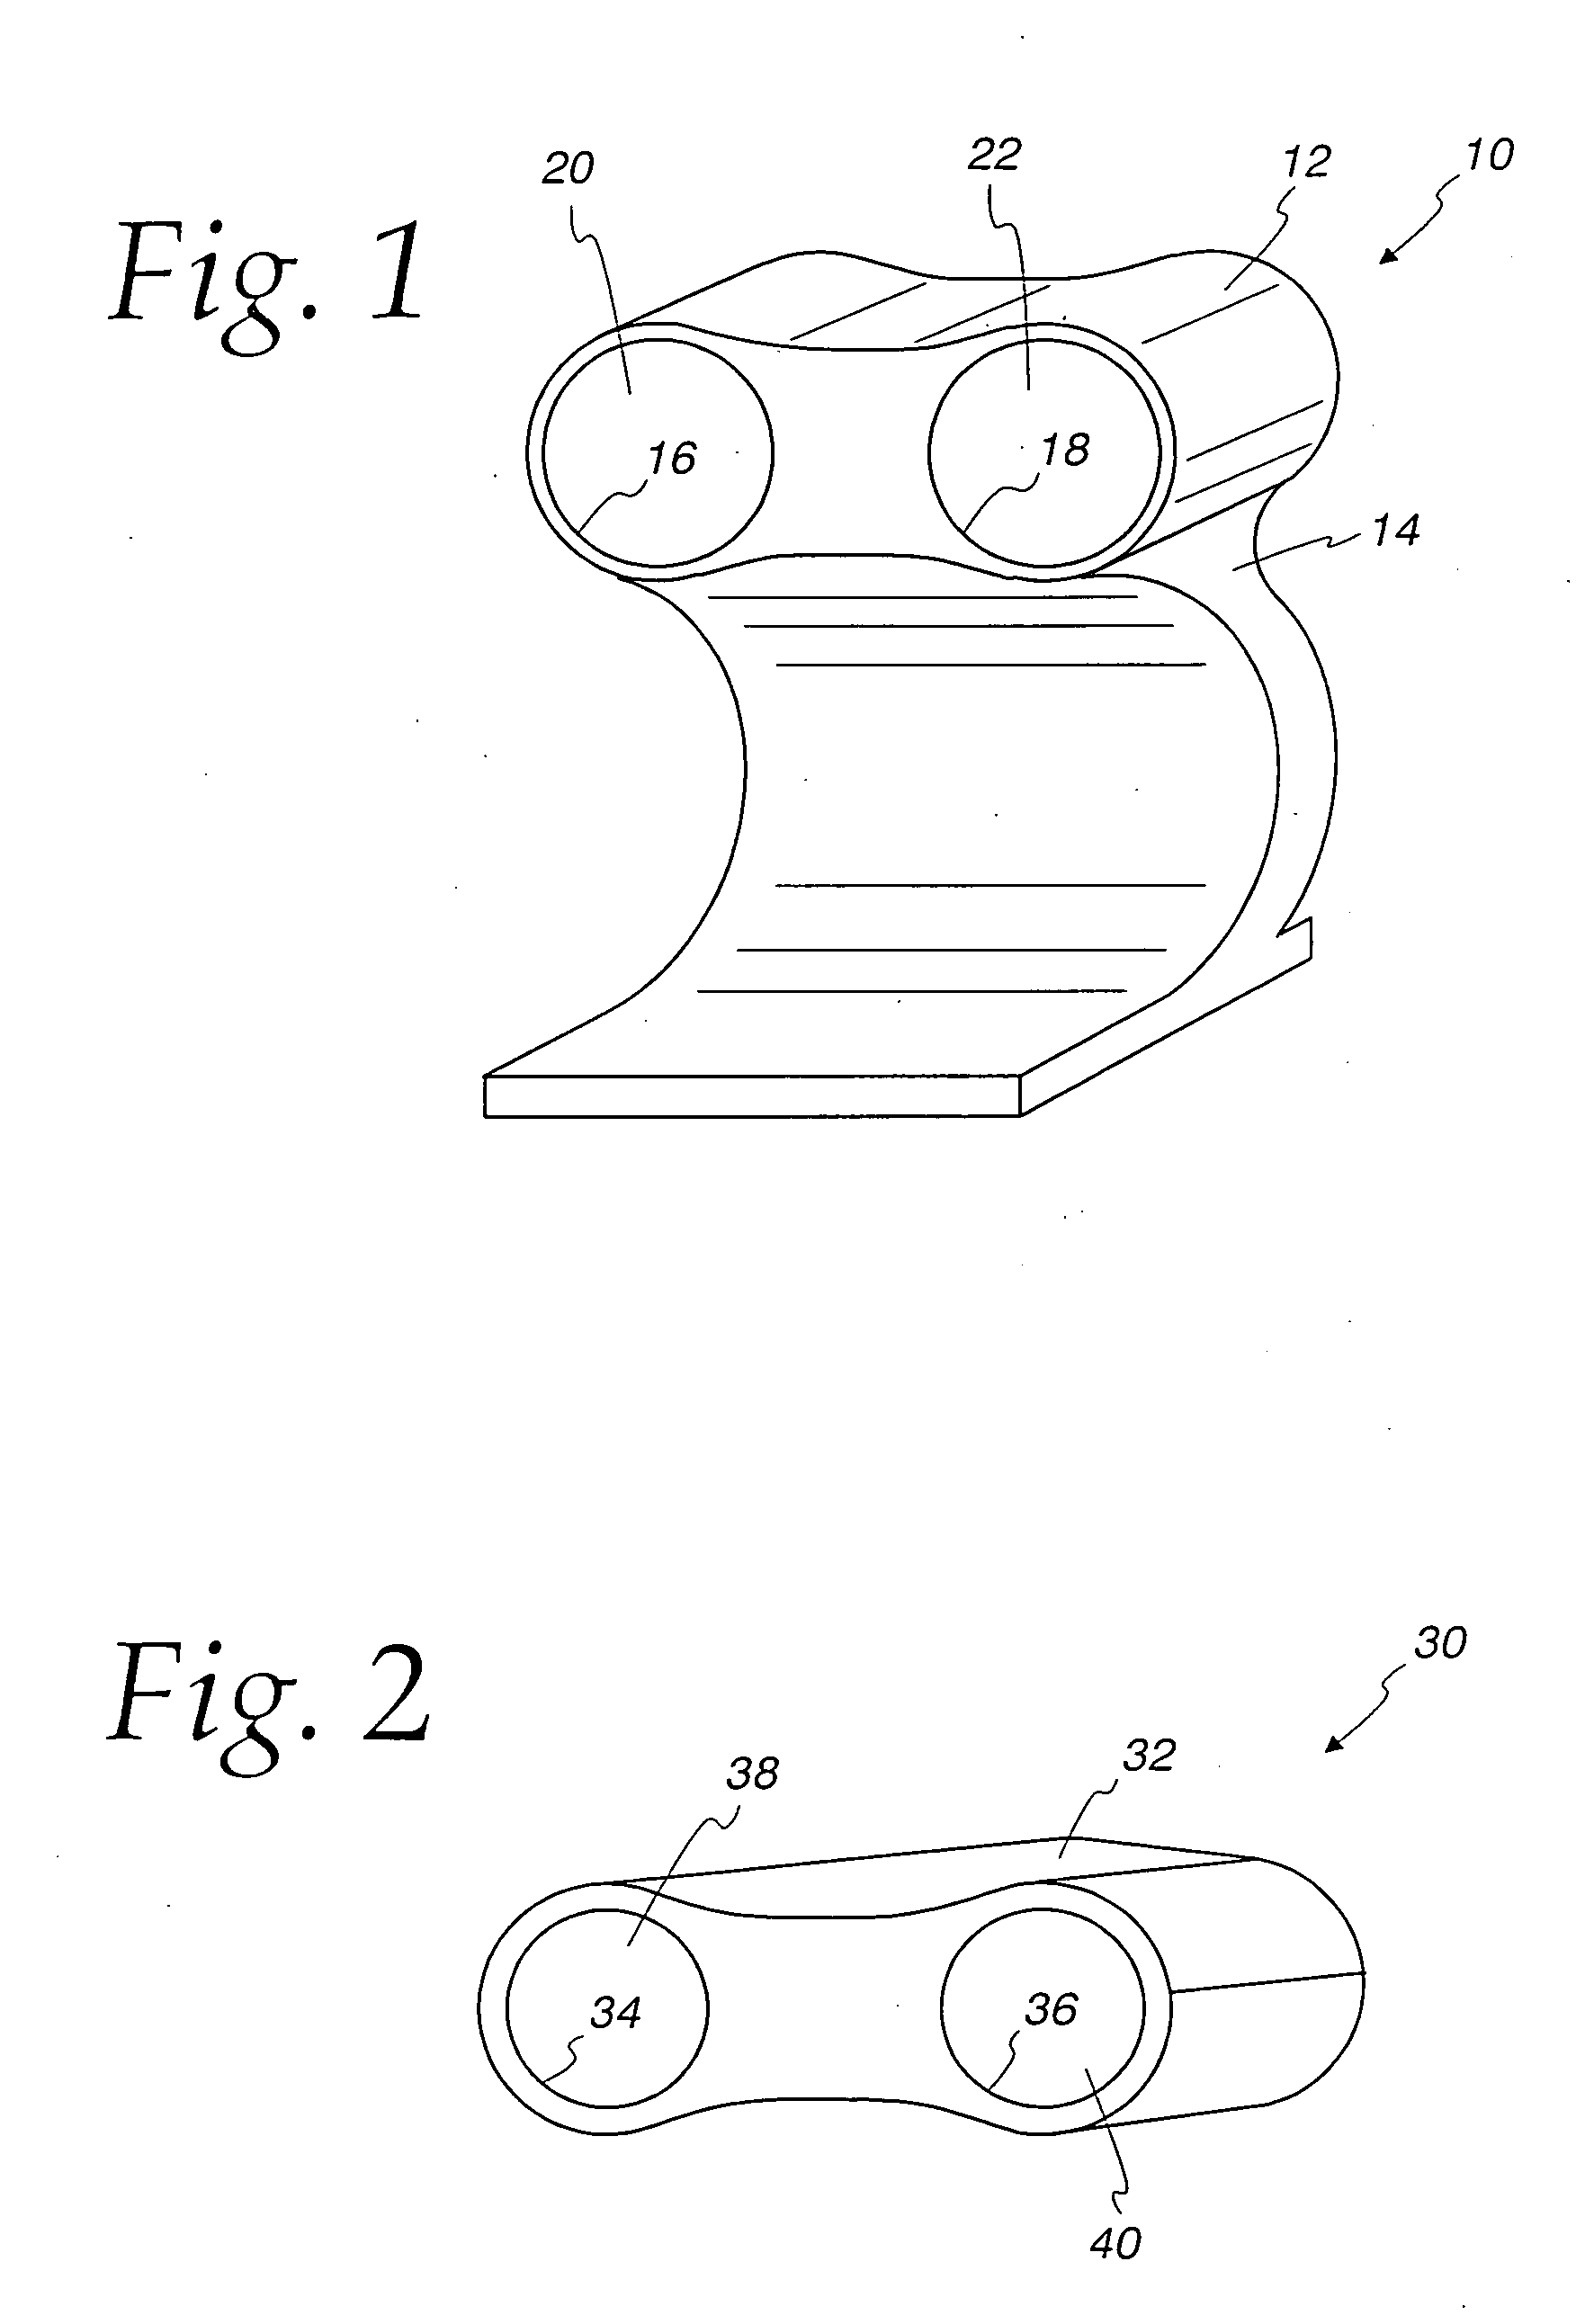 System and method for measuring fixation disparity and proprioceptive misalignment of the visual system